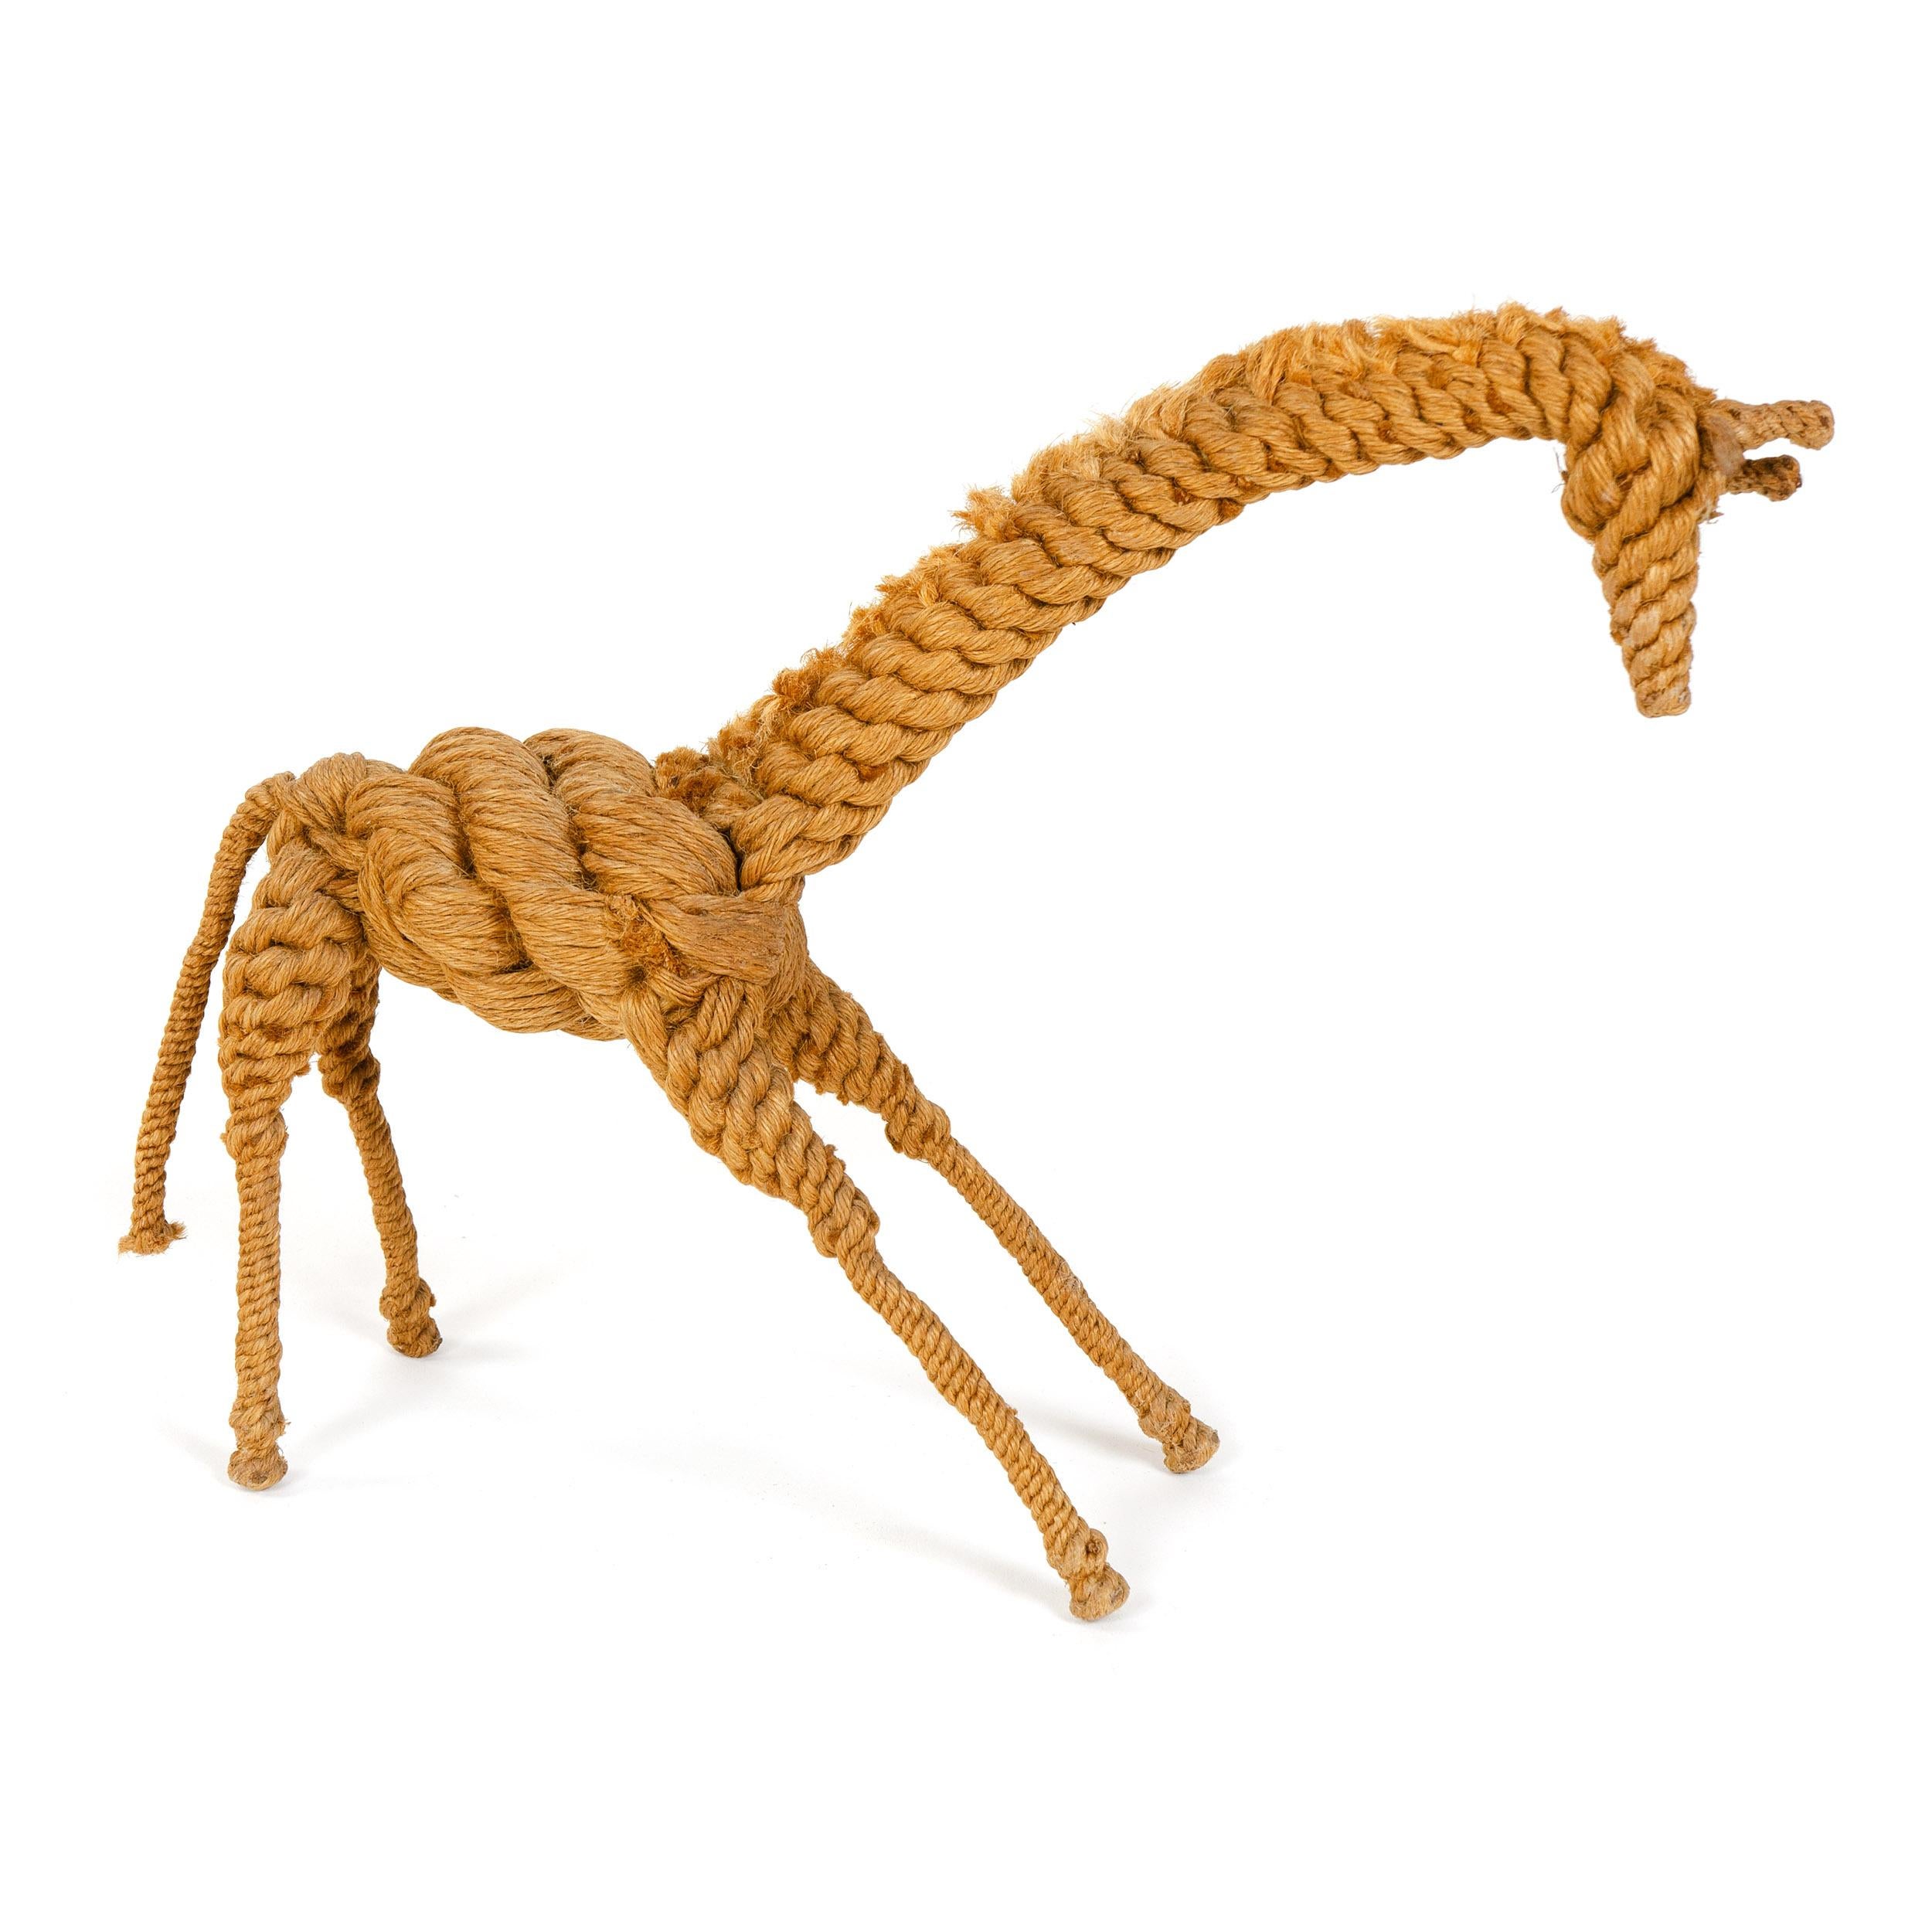 A small giraffe sculpture made from hand knotted and tied rope. Designed by Kay Bojesen and produced by Jorgen Bloch in Denmark, circa 1960s.